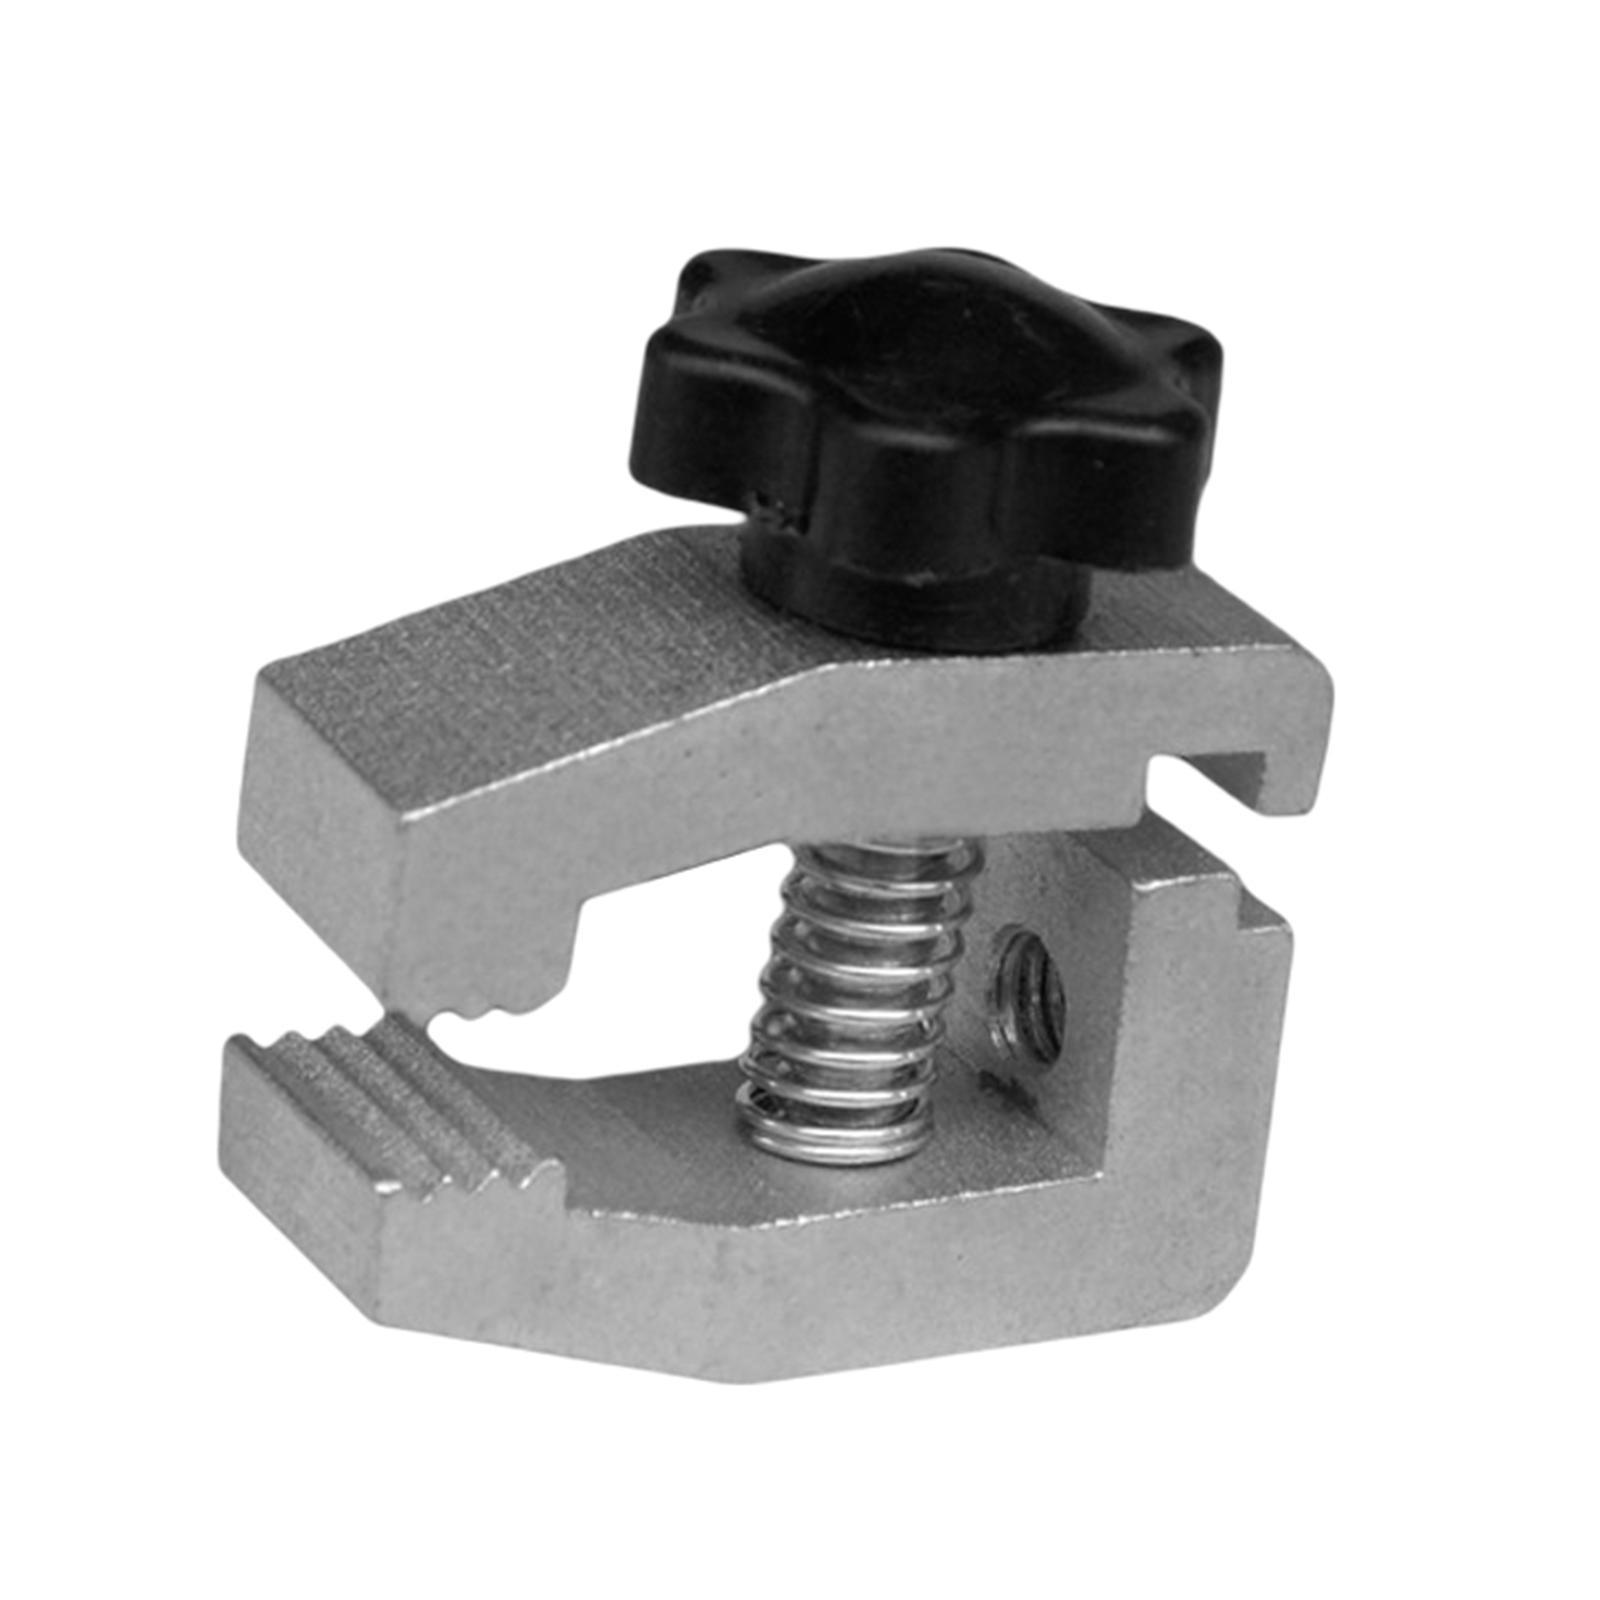 Jaw Clamp Push Pull  Fixtures 500N High Loading Capacity Professional Good Performance Accessory Durable Tensile Testing Tool